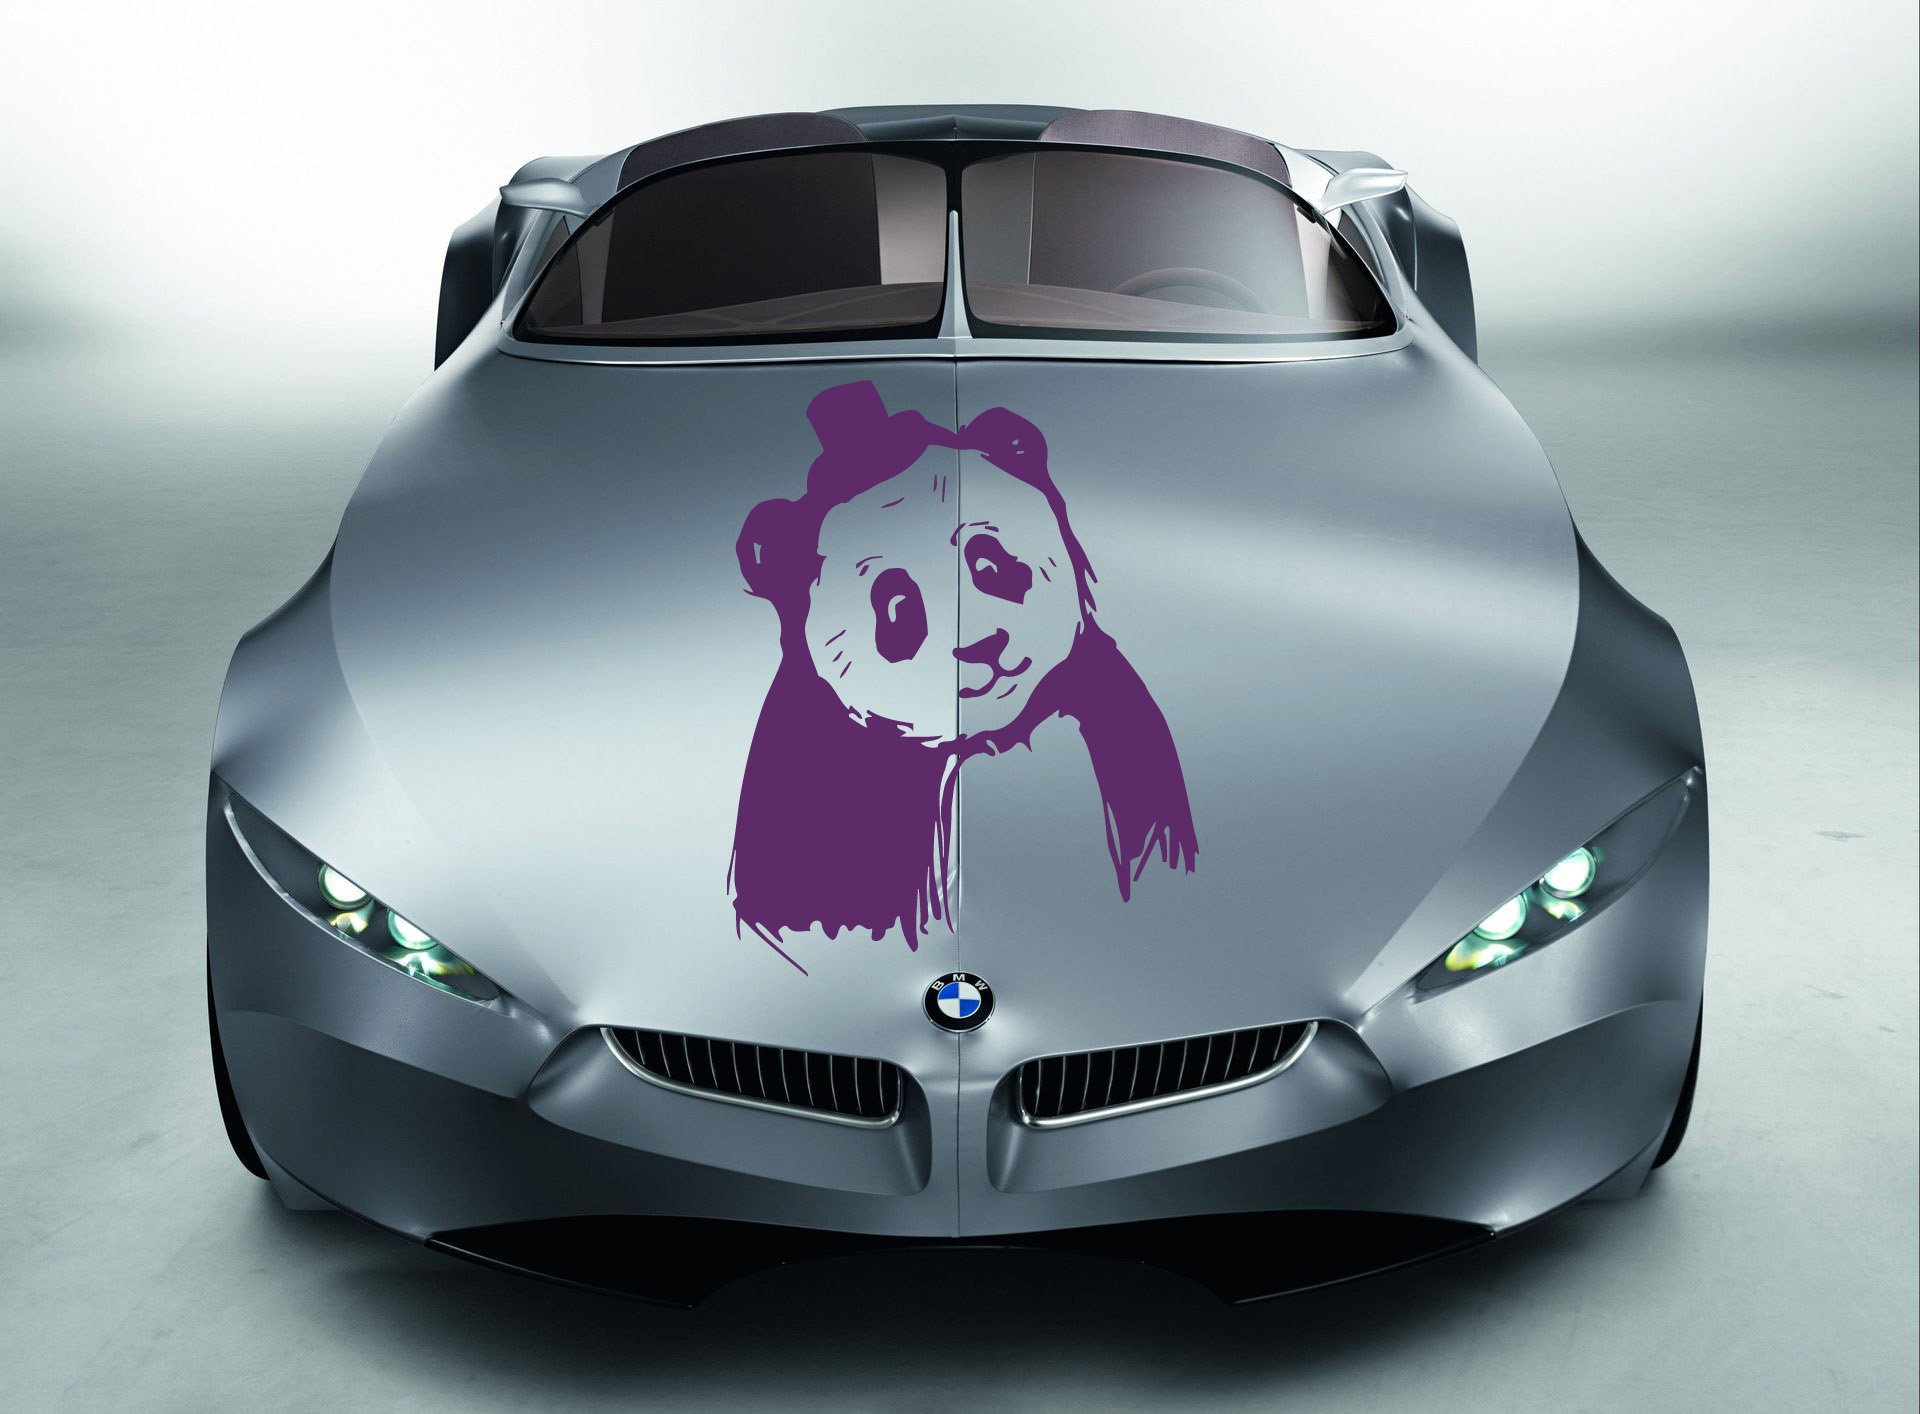 Auto Car Decals Animals Cute Sad Panda With A Classic Hat Pattern For Hood Decor Removable Stylish Sticker Unique Design Any